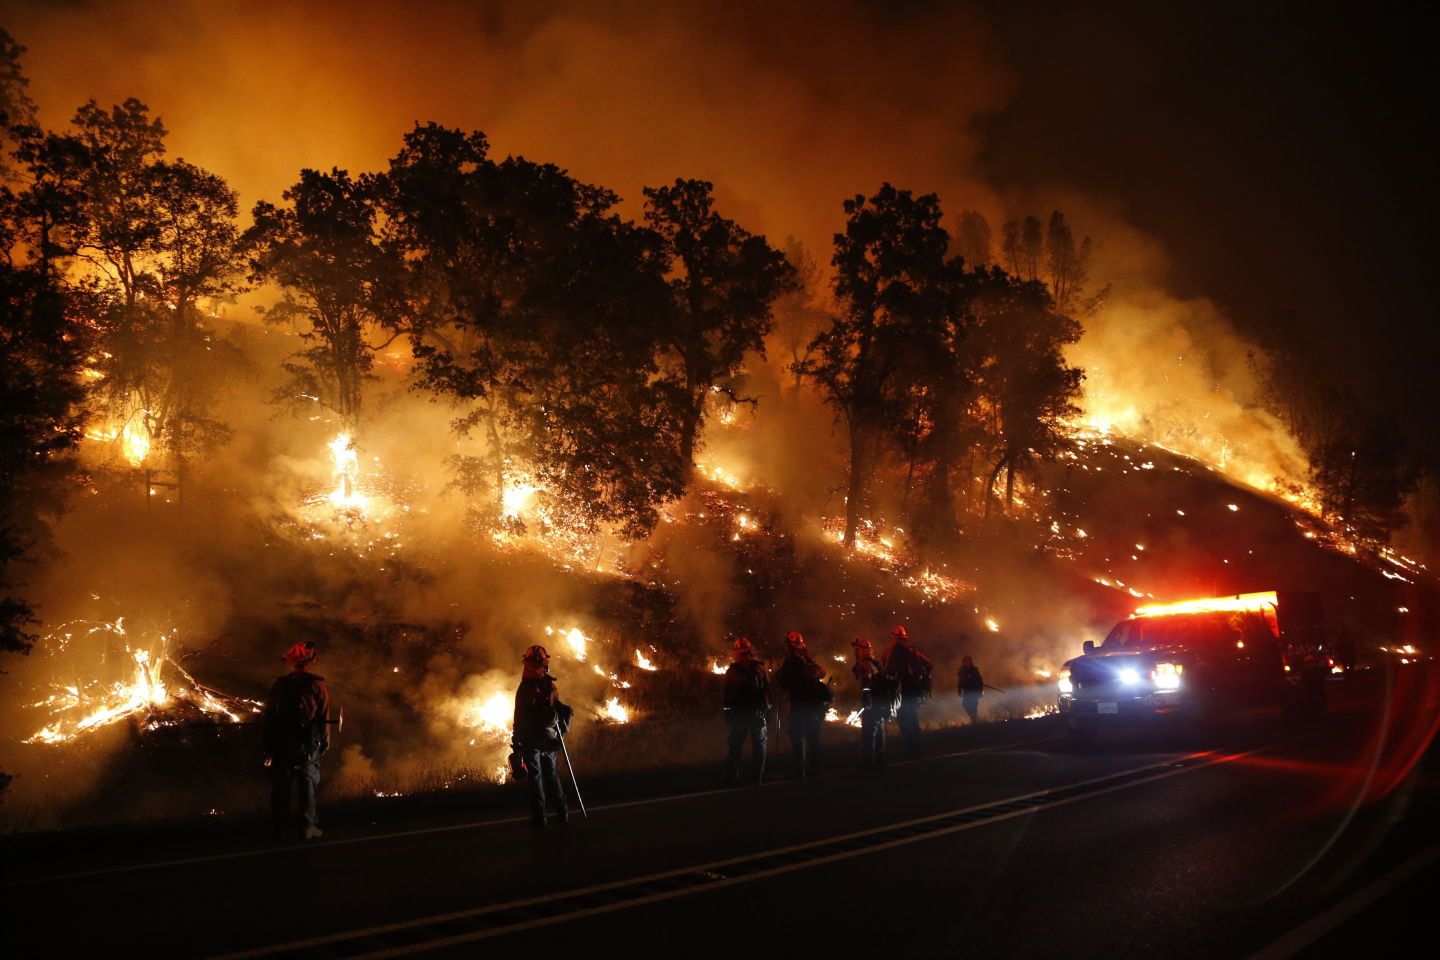 Firefighters with the Marin County Fire Department's Tamalpais Fire Crew monitor a backfire as they battle the Valley Fire.   Stephen Lam/Getty Images